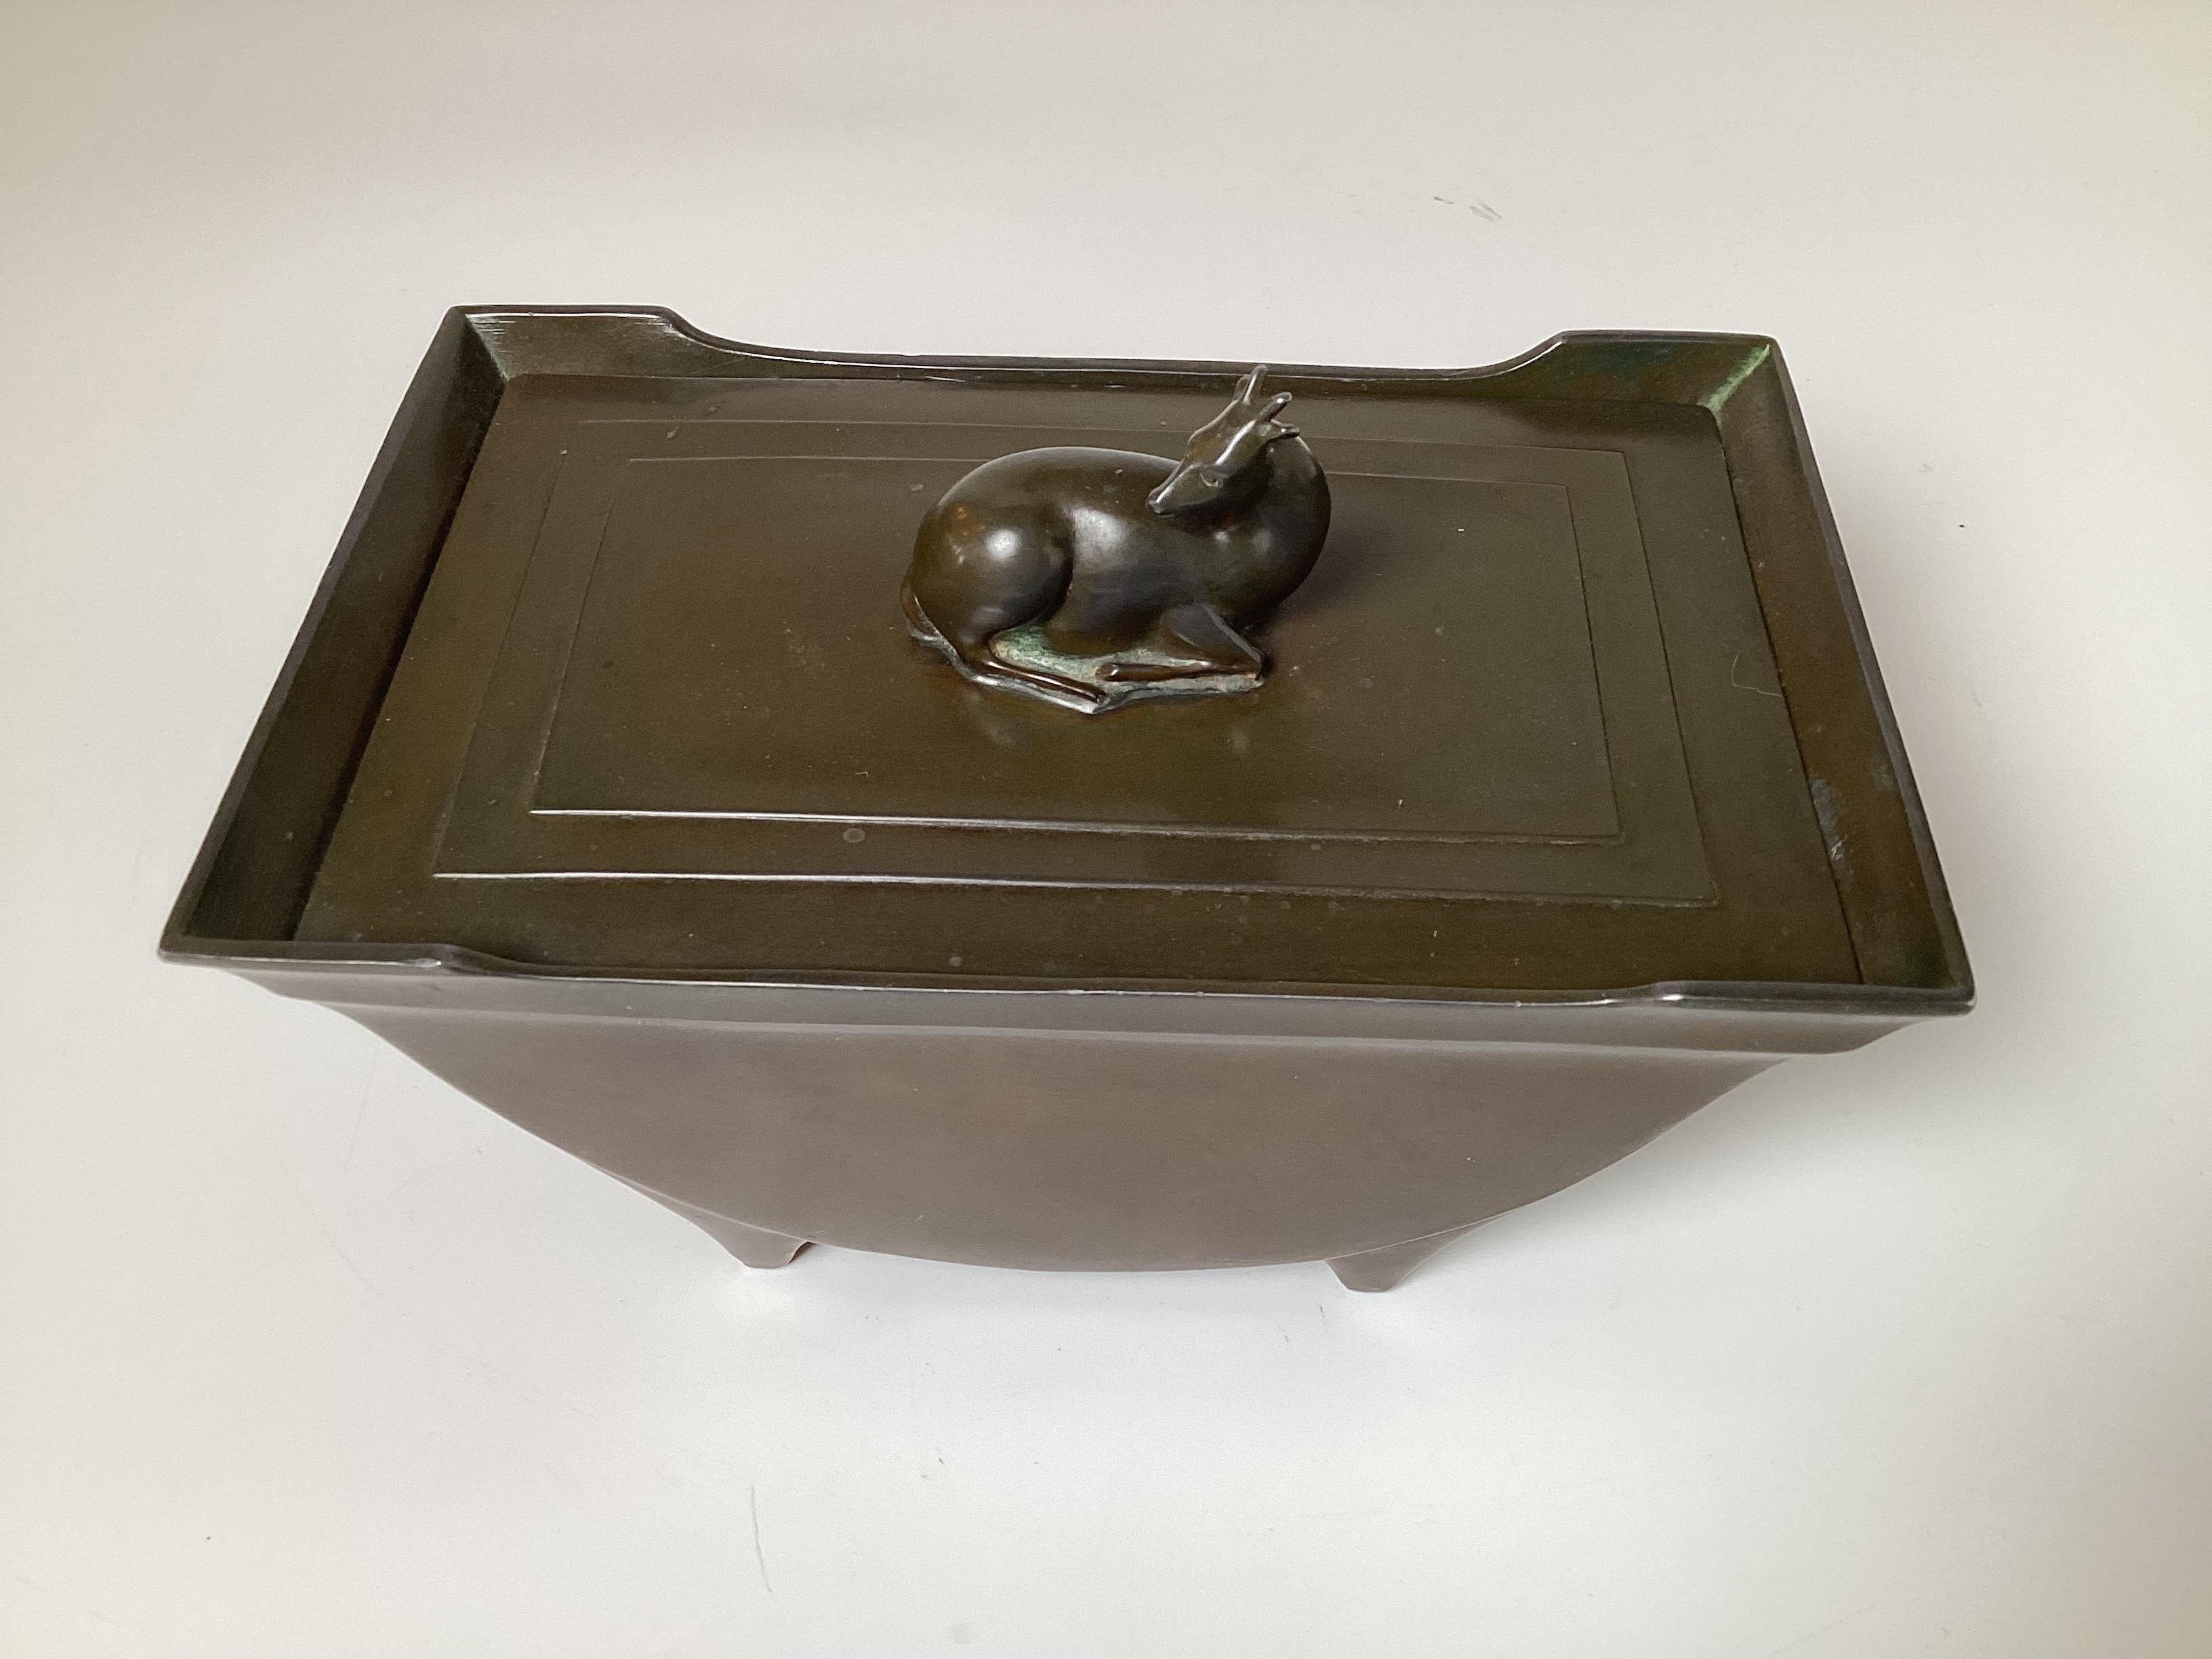 An Art Deco patinated bronze box by Disko Metal, Denmark, The lid features a fawn curled atop resting on a footed box base. 7 inches wide, 4.75 inches high, 4.5 inched deep.